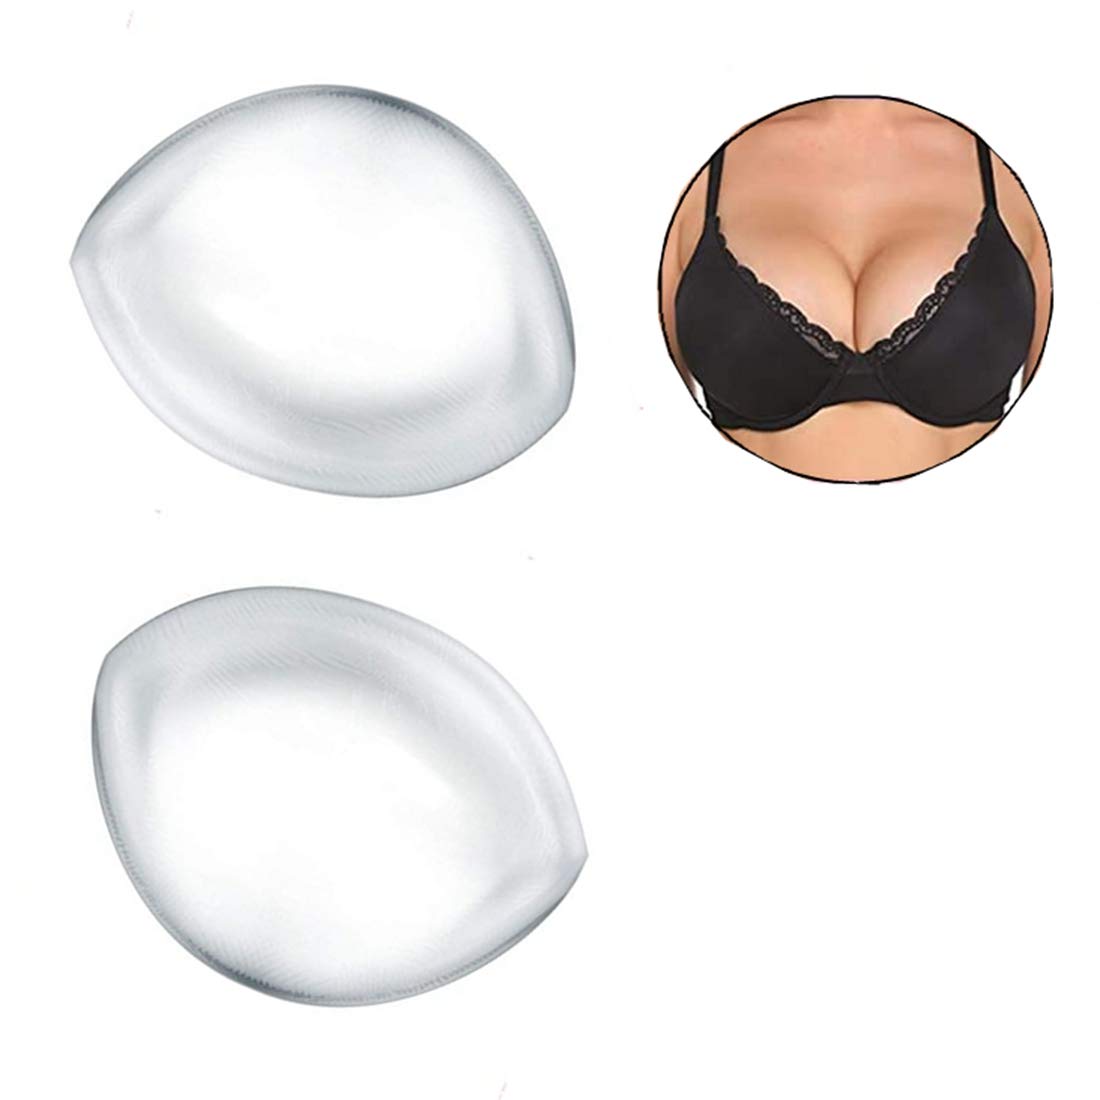 Silicone Cleavage Enhancer Breast Pushup Pad Bra Insert S Size